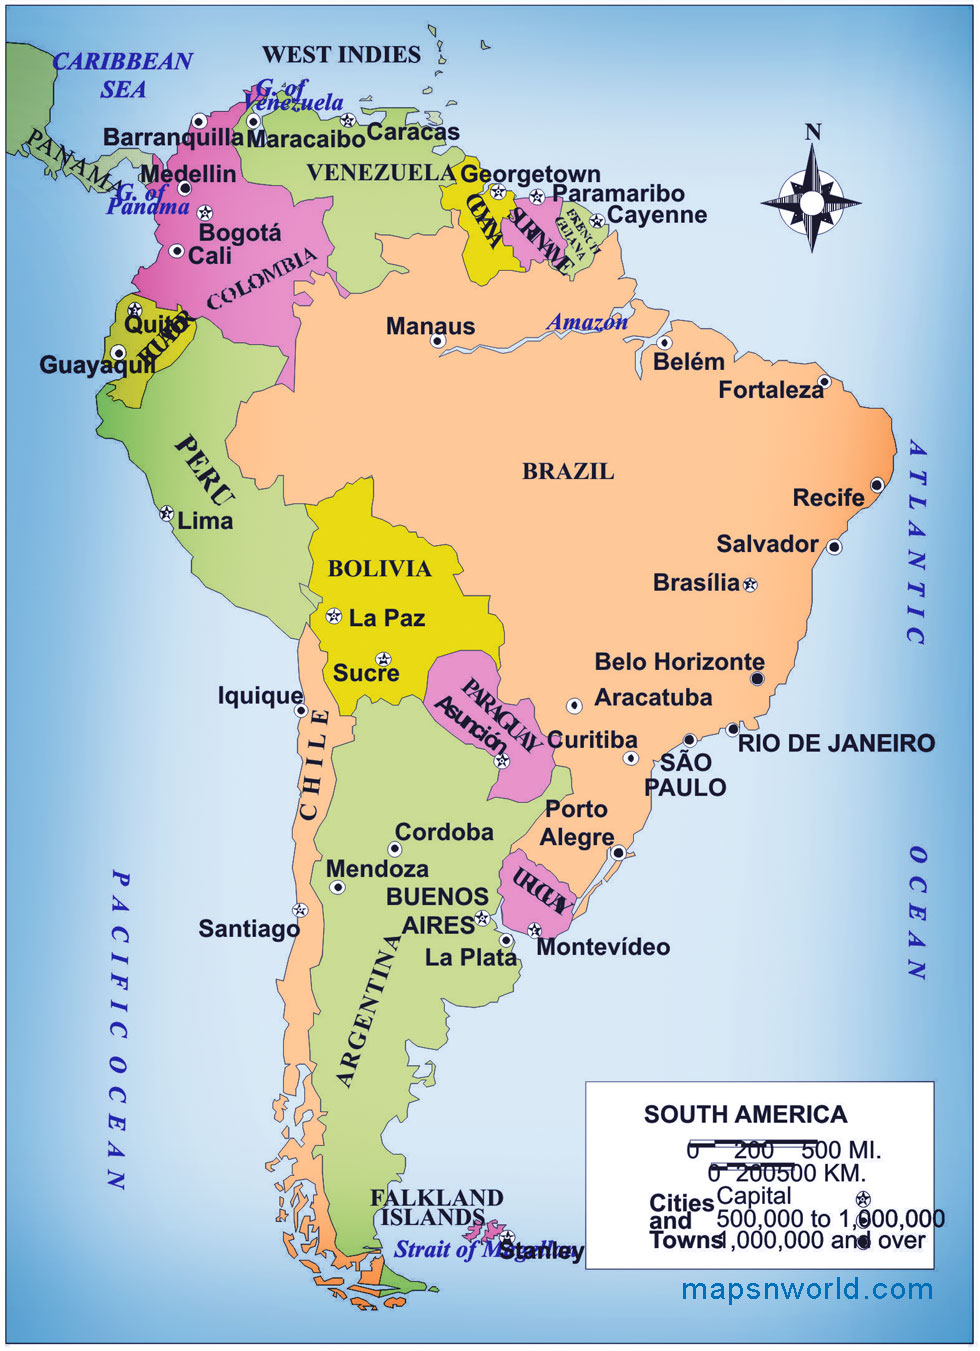 Where should investors go in South America? A guide - Investment Monitor